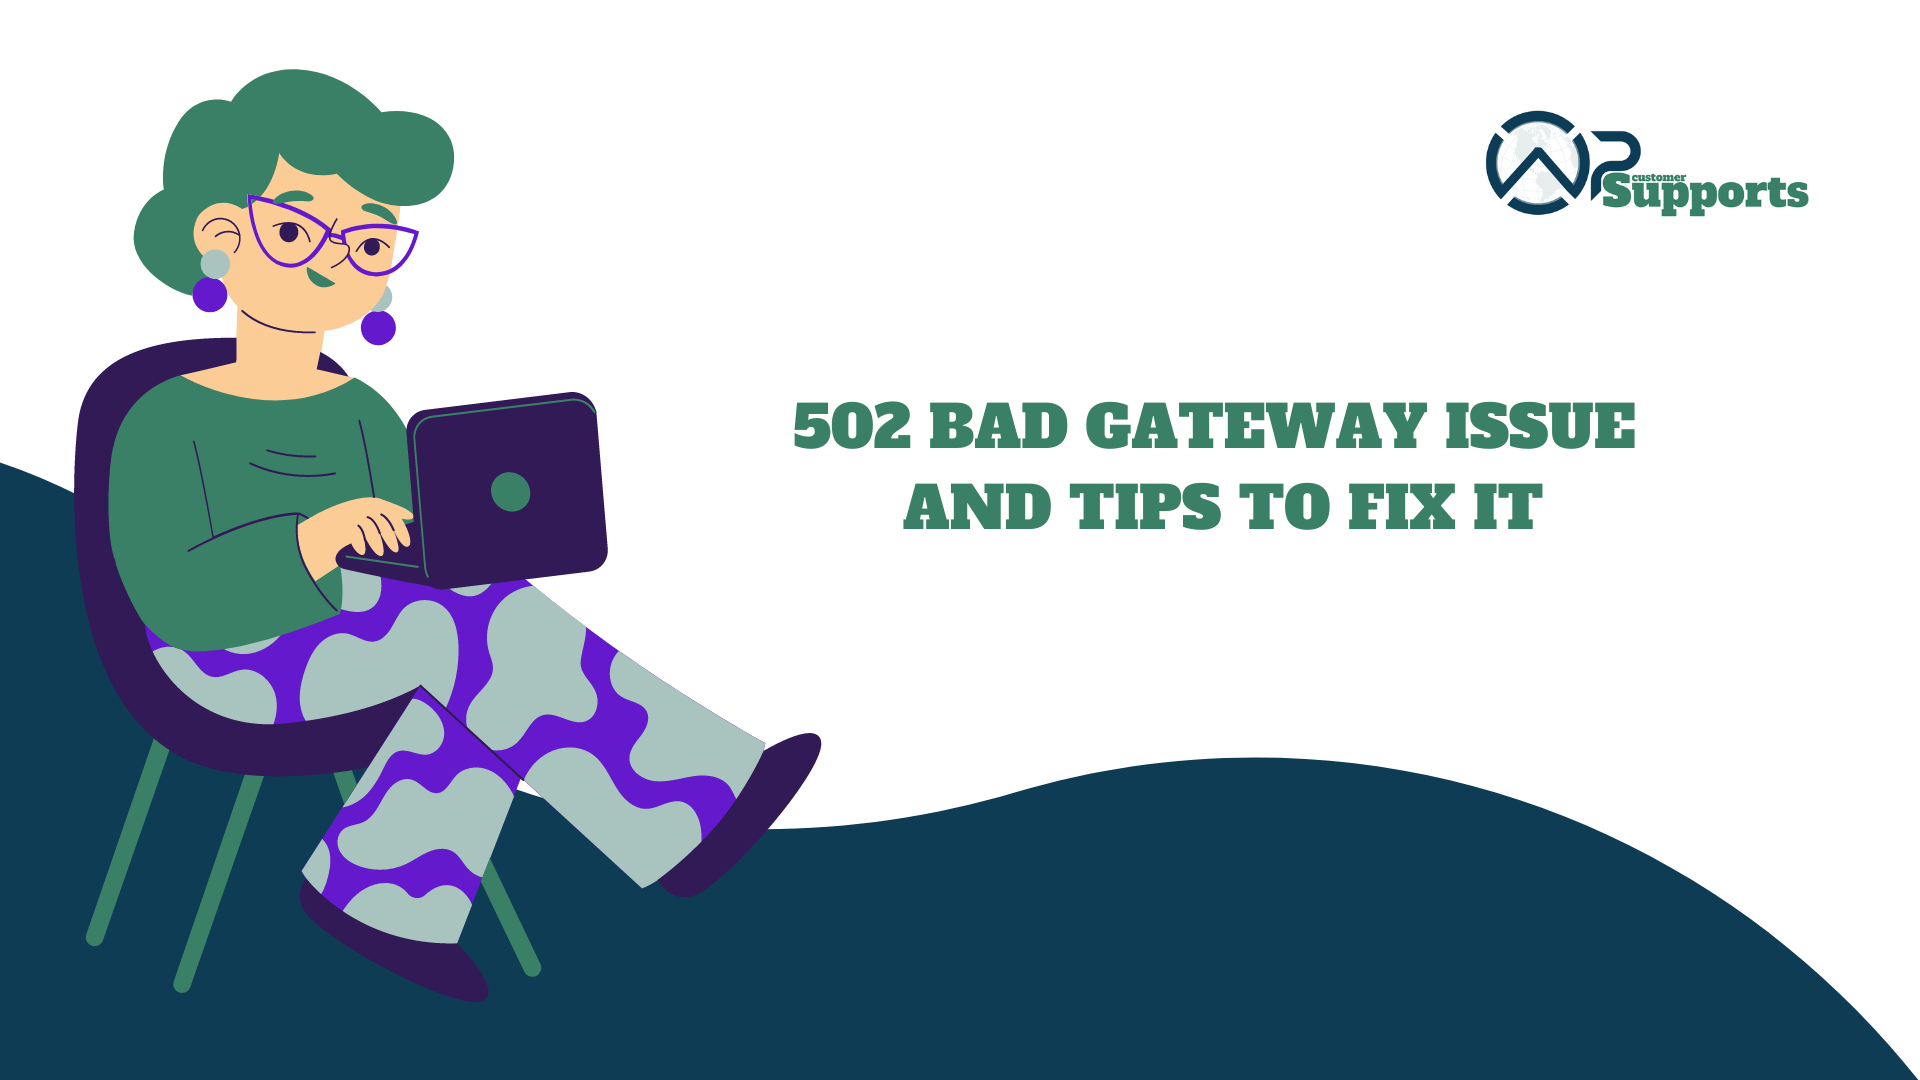 502 BAD GATEWAY ISSUE AND TIPS TO FIX IT